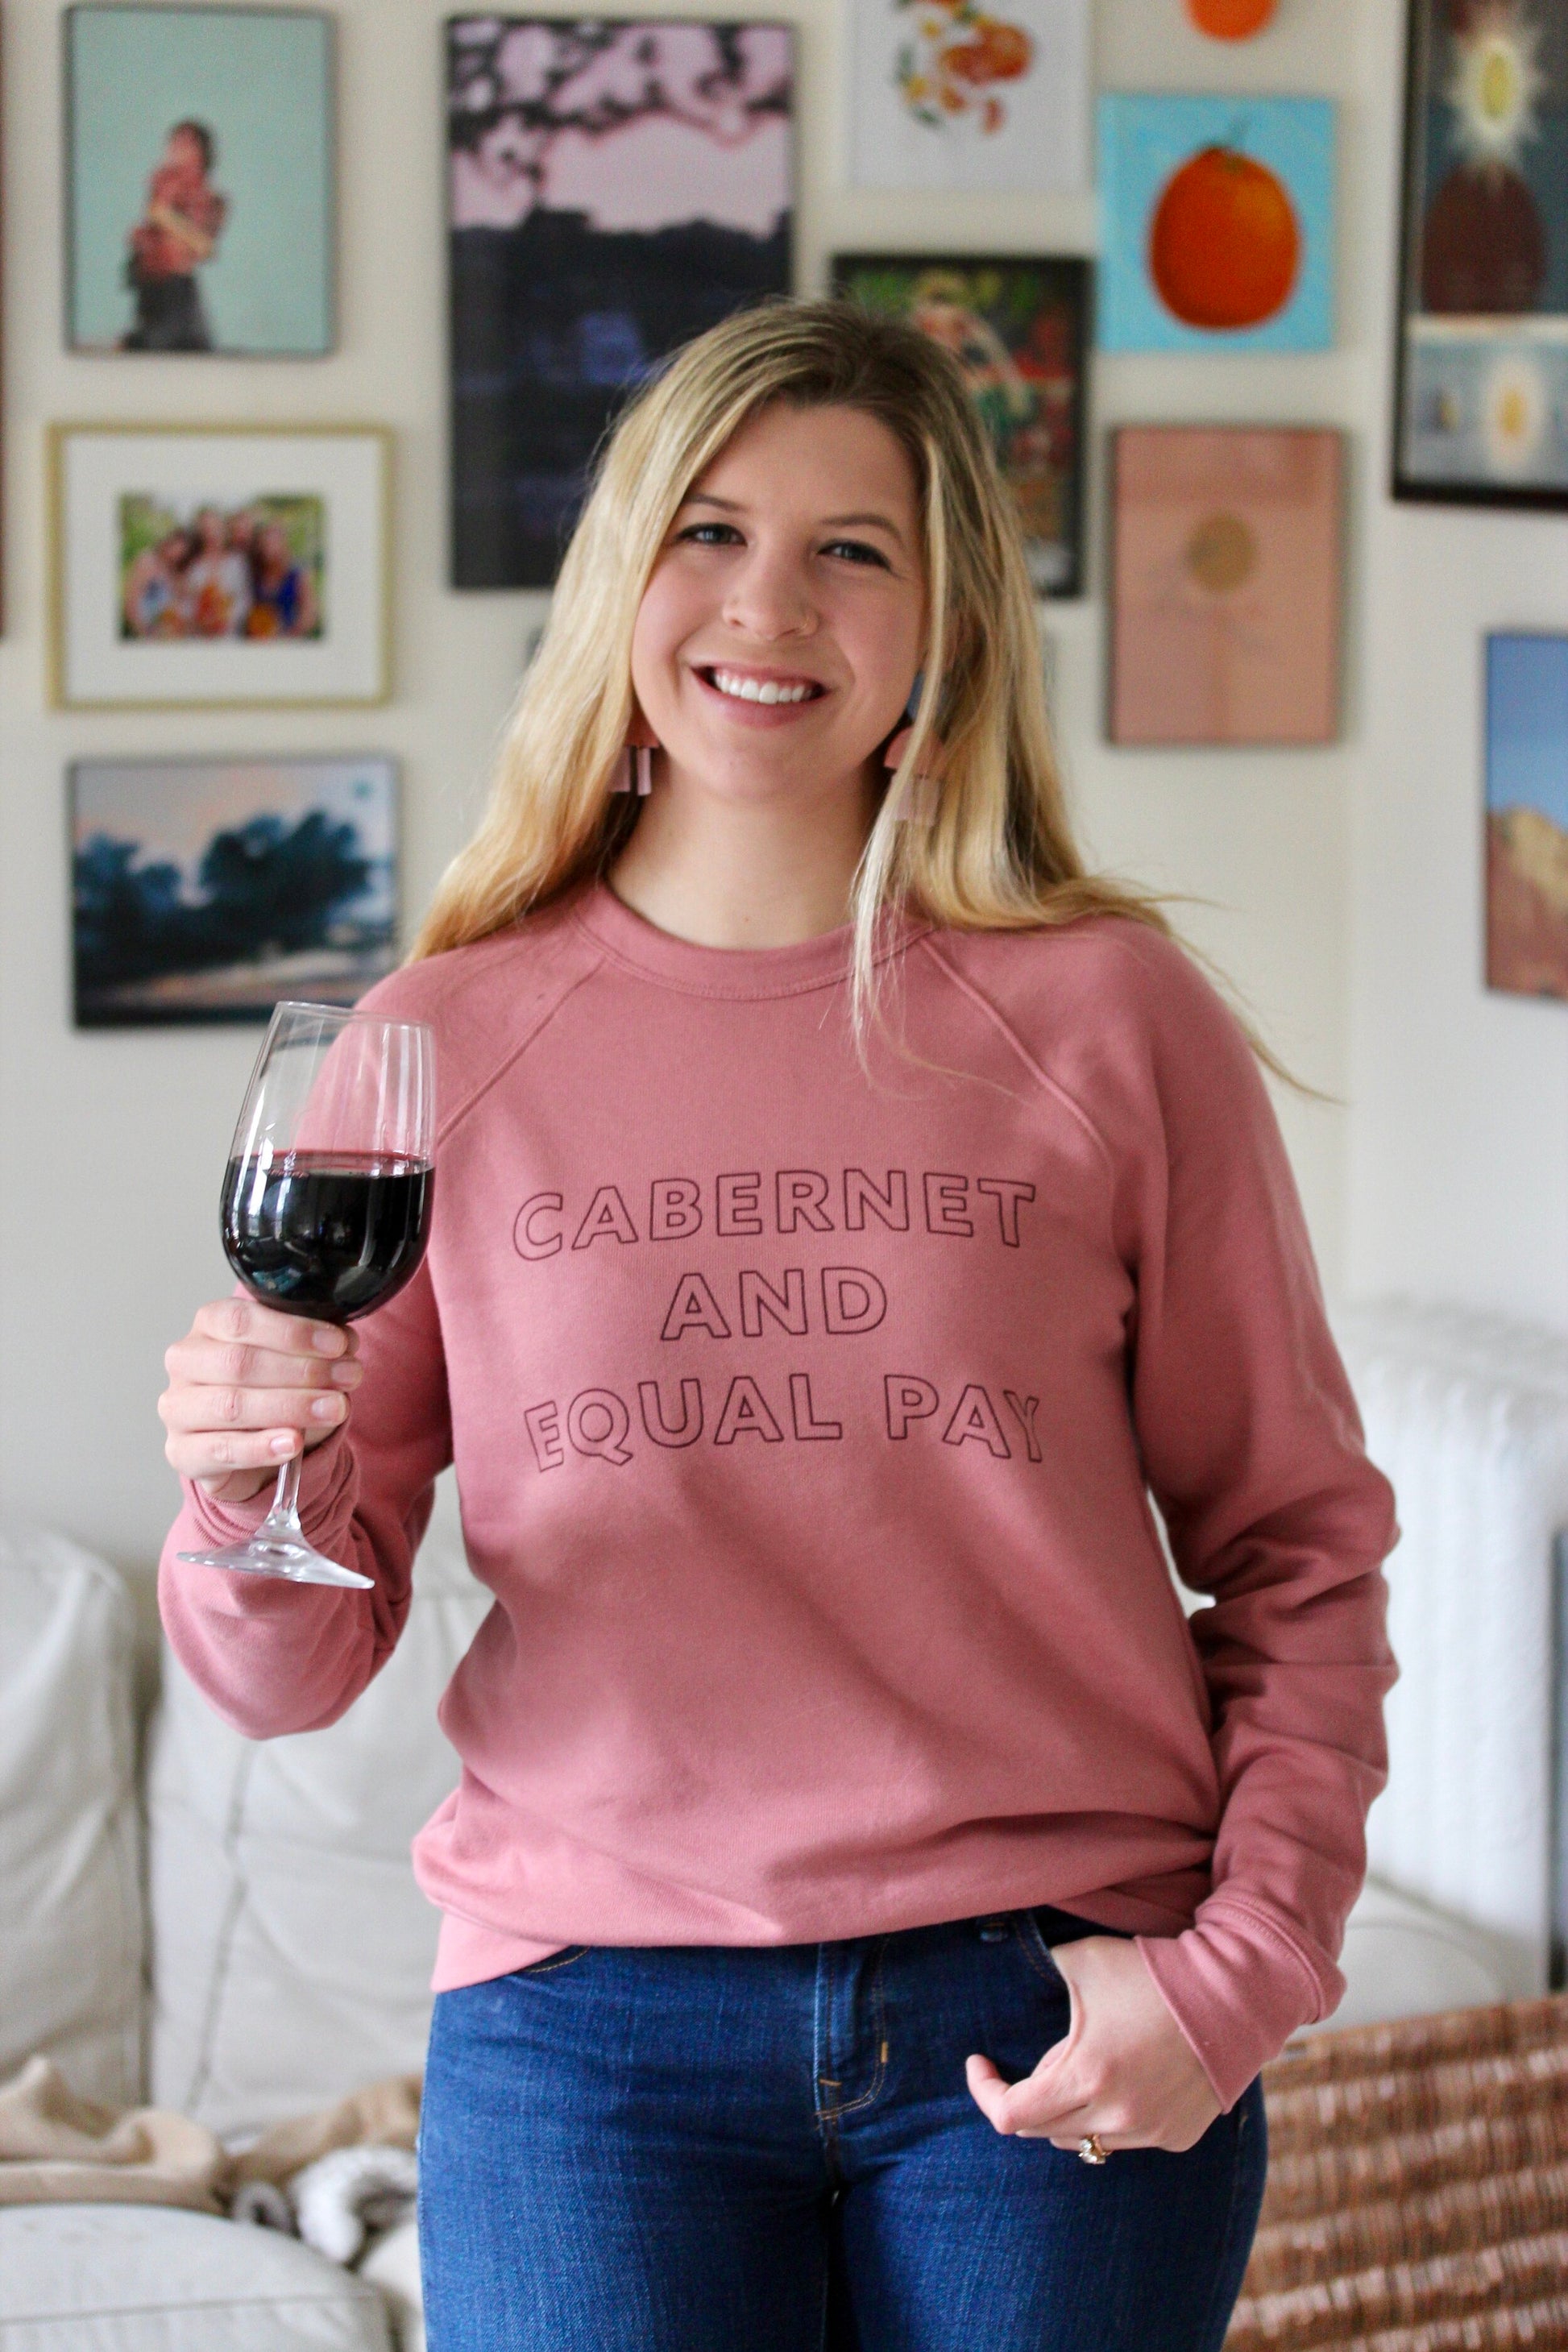 Woman wearing pink sweatshirt with the words "Cabernet and Equal Pay" holding glass of wine